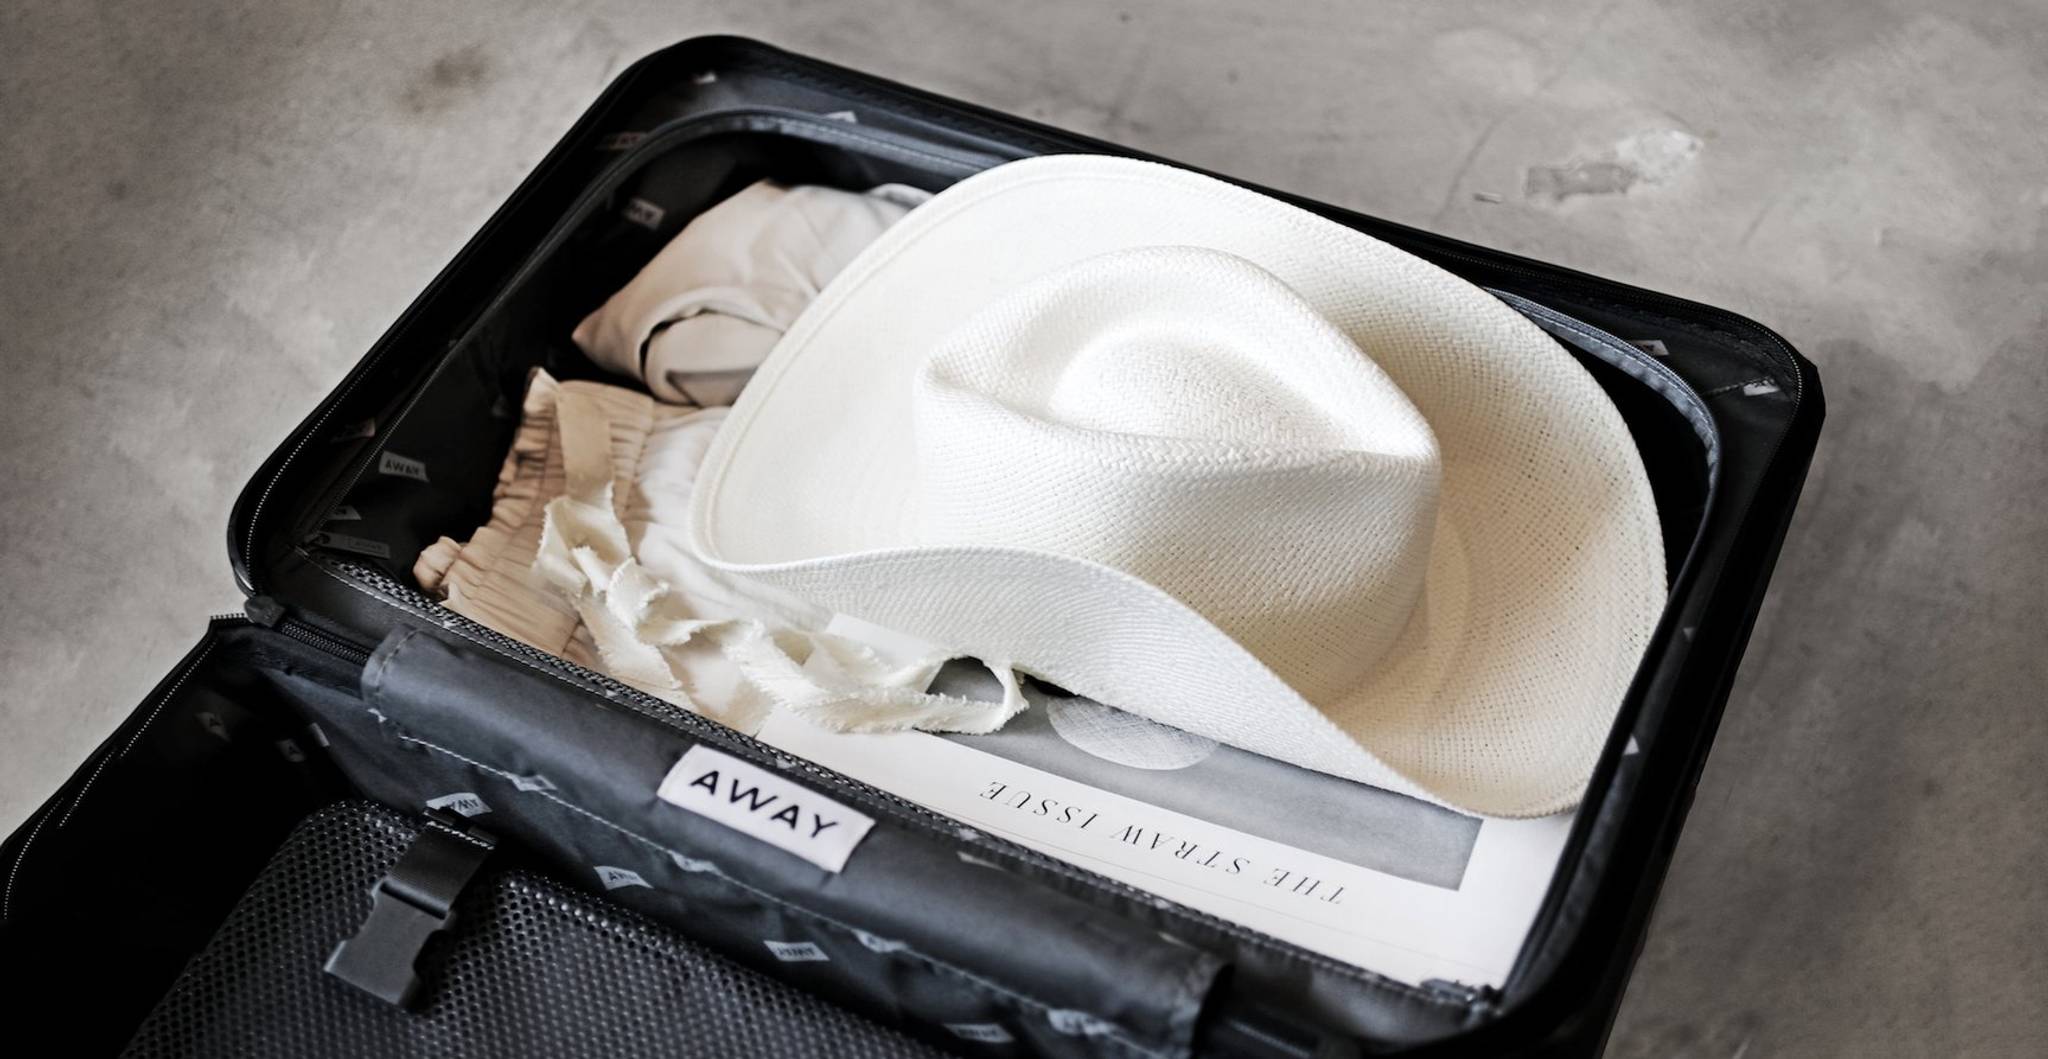 How to take care of your straw hat? In this post we give you the keys